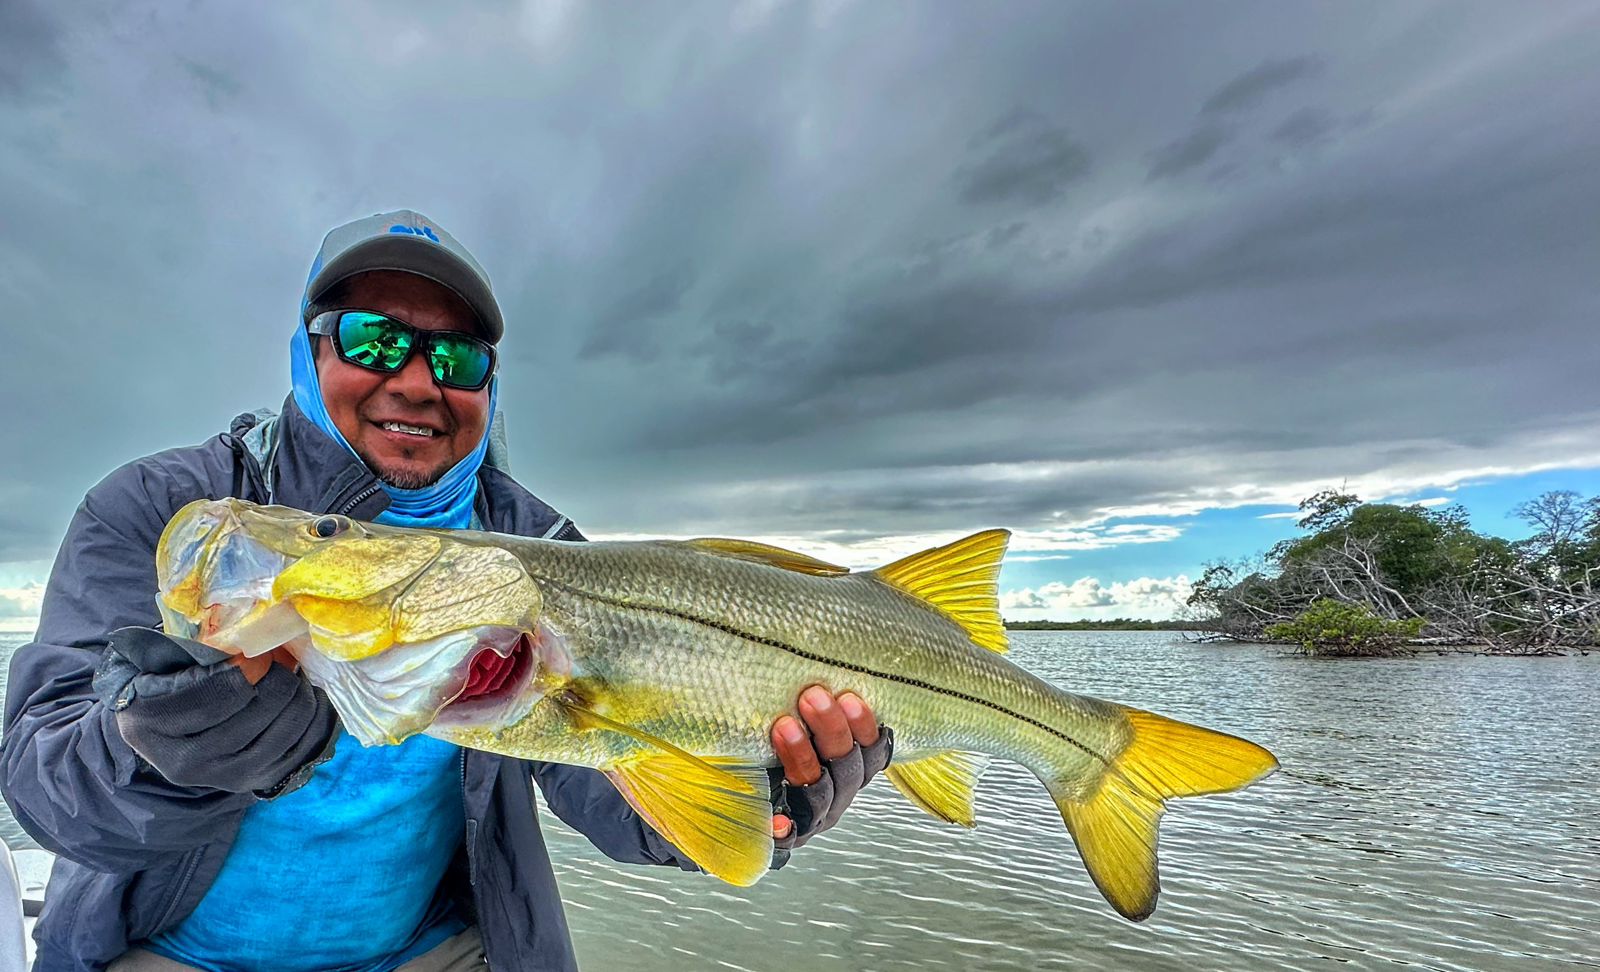 ESB Guide with Snook